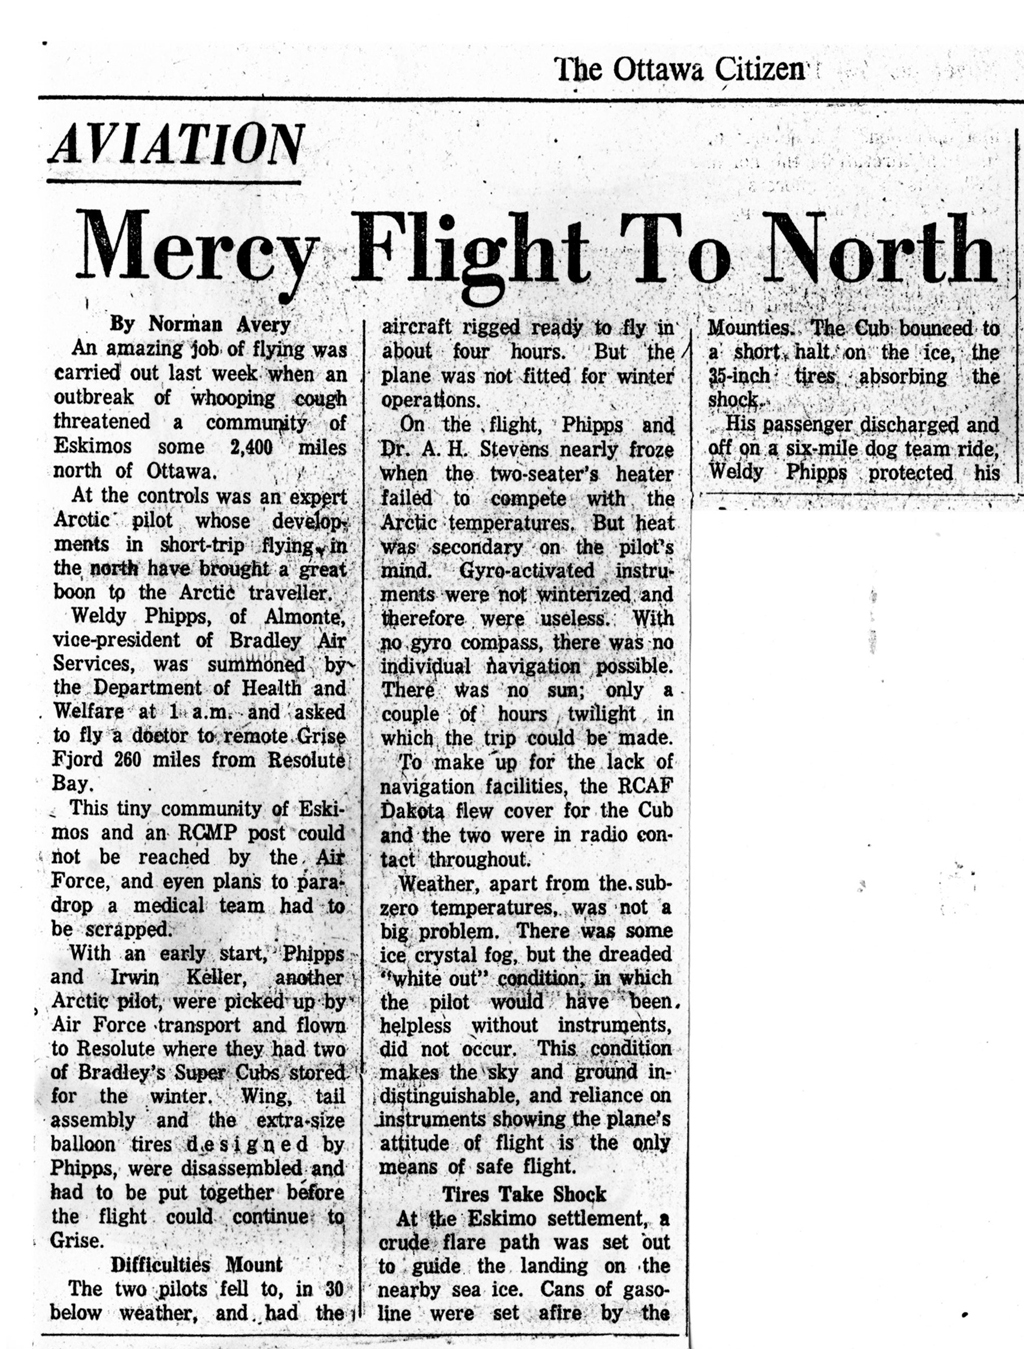 Newspaper article The Ottawa Citizen 1960-11-19 "Mercy Flight to North" Pilot Weldy Phipps and Dr. A. H. ("Pete") STEVENS. Left half